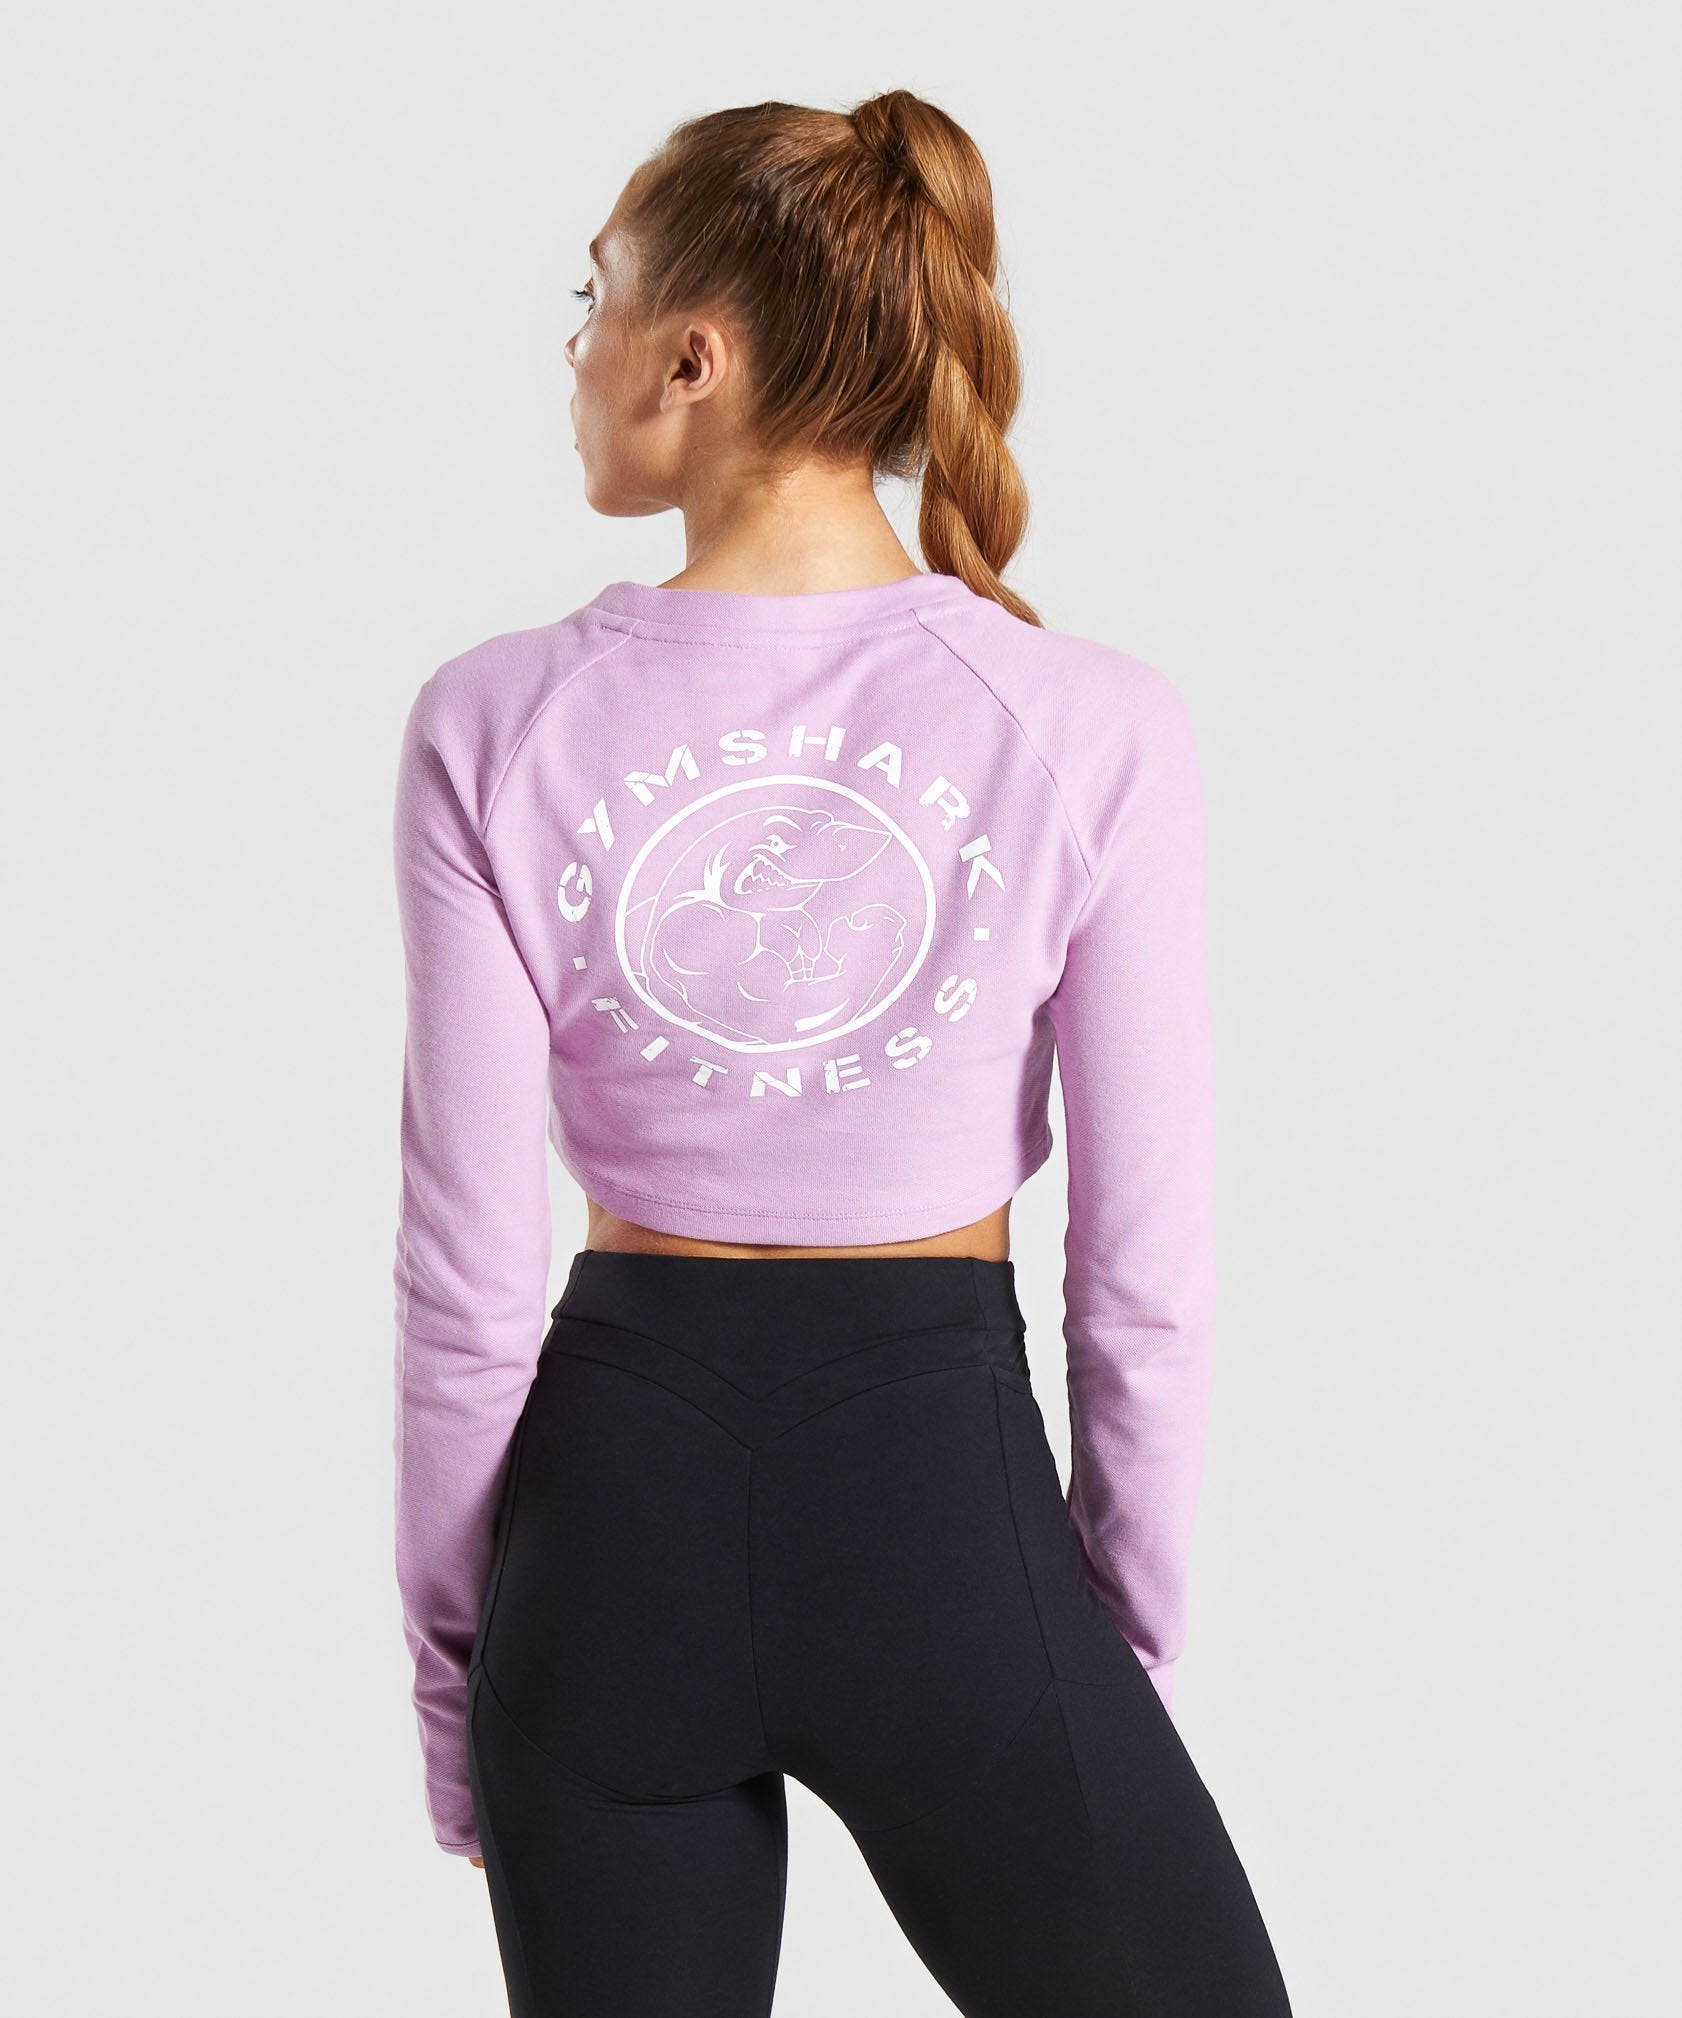 Legacy Fitness Long Sleeve Crop Top in Pink - view 2